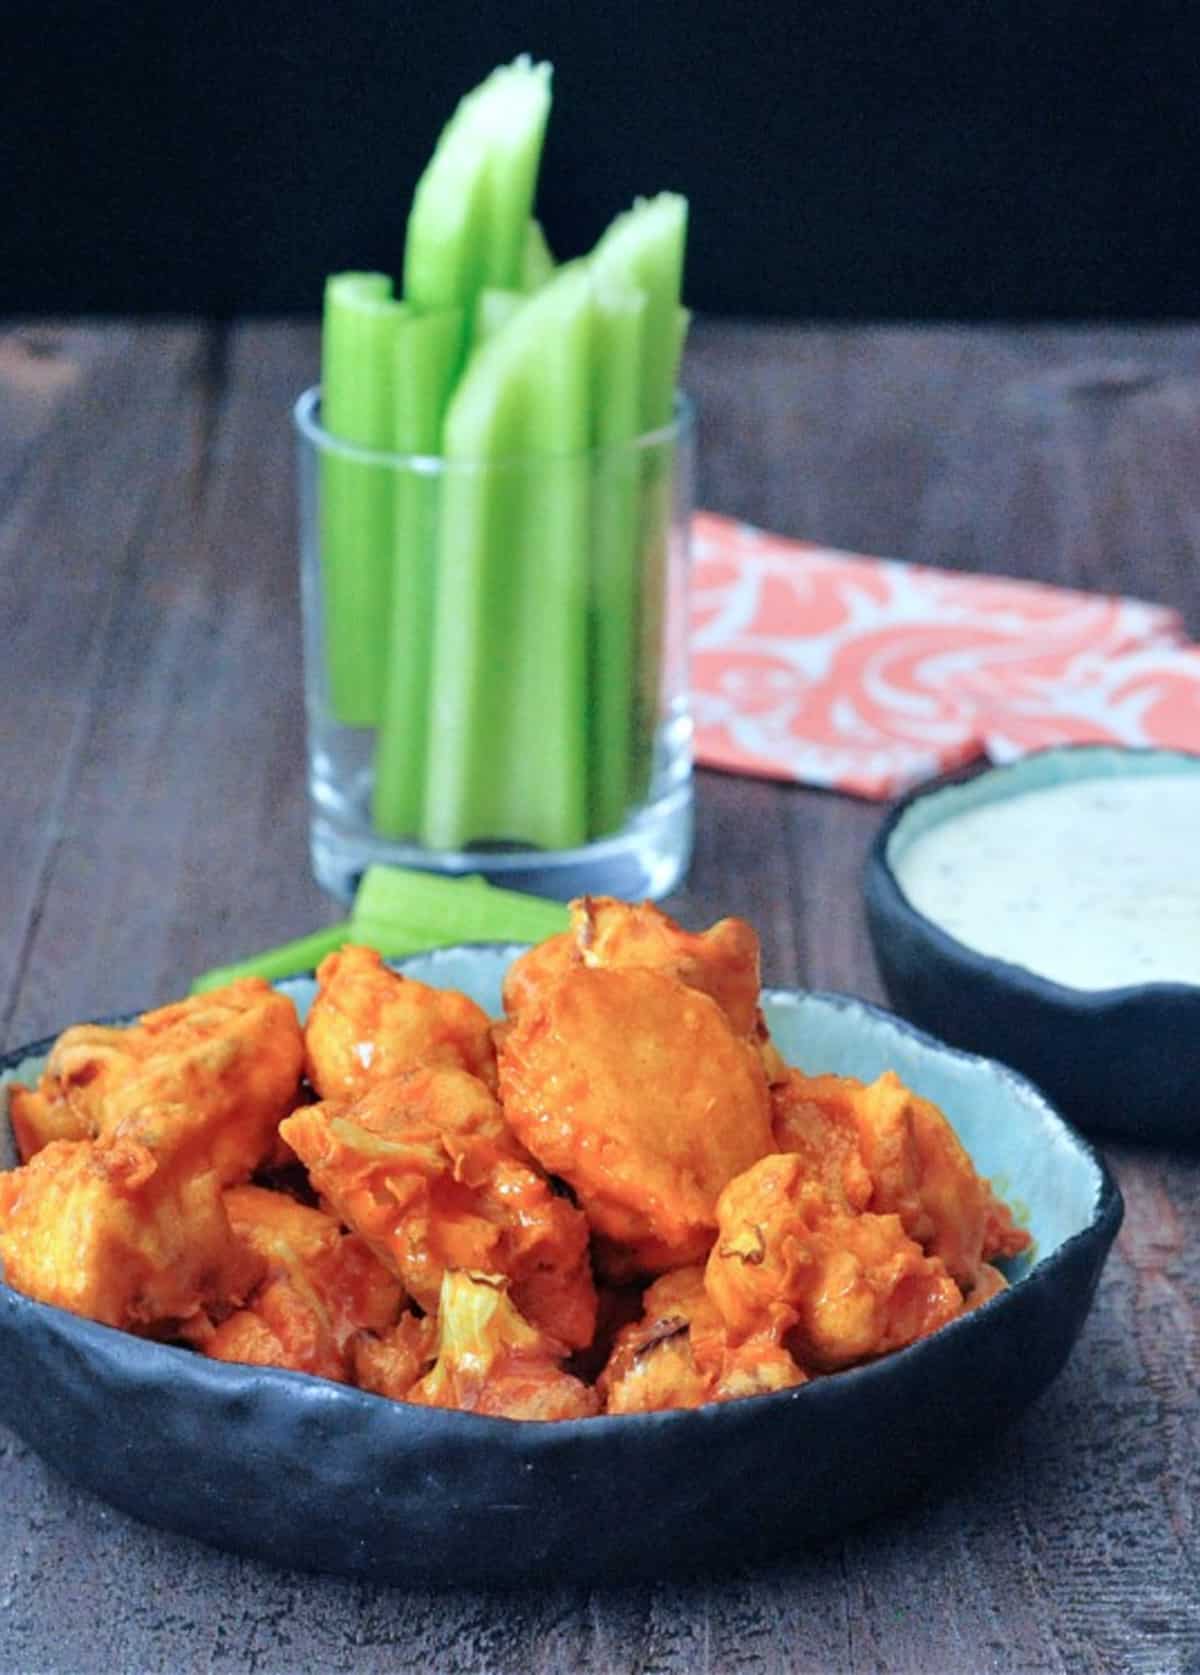 Vegan air fryer buffalo cauliflower served in a bowl with celery and ranch dressing on the side.